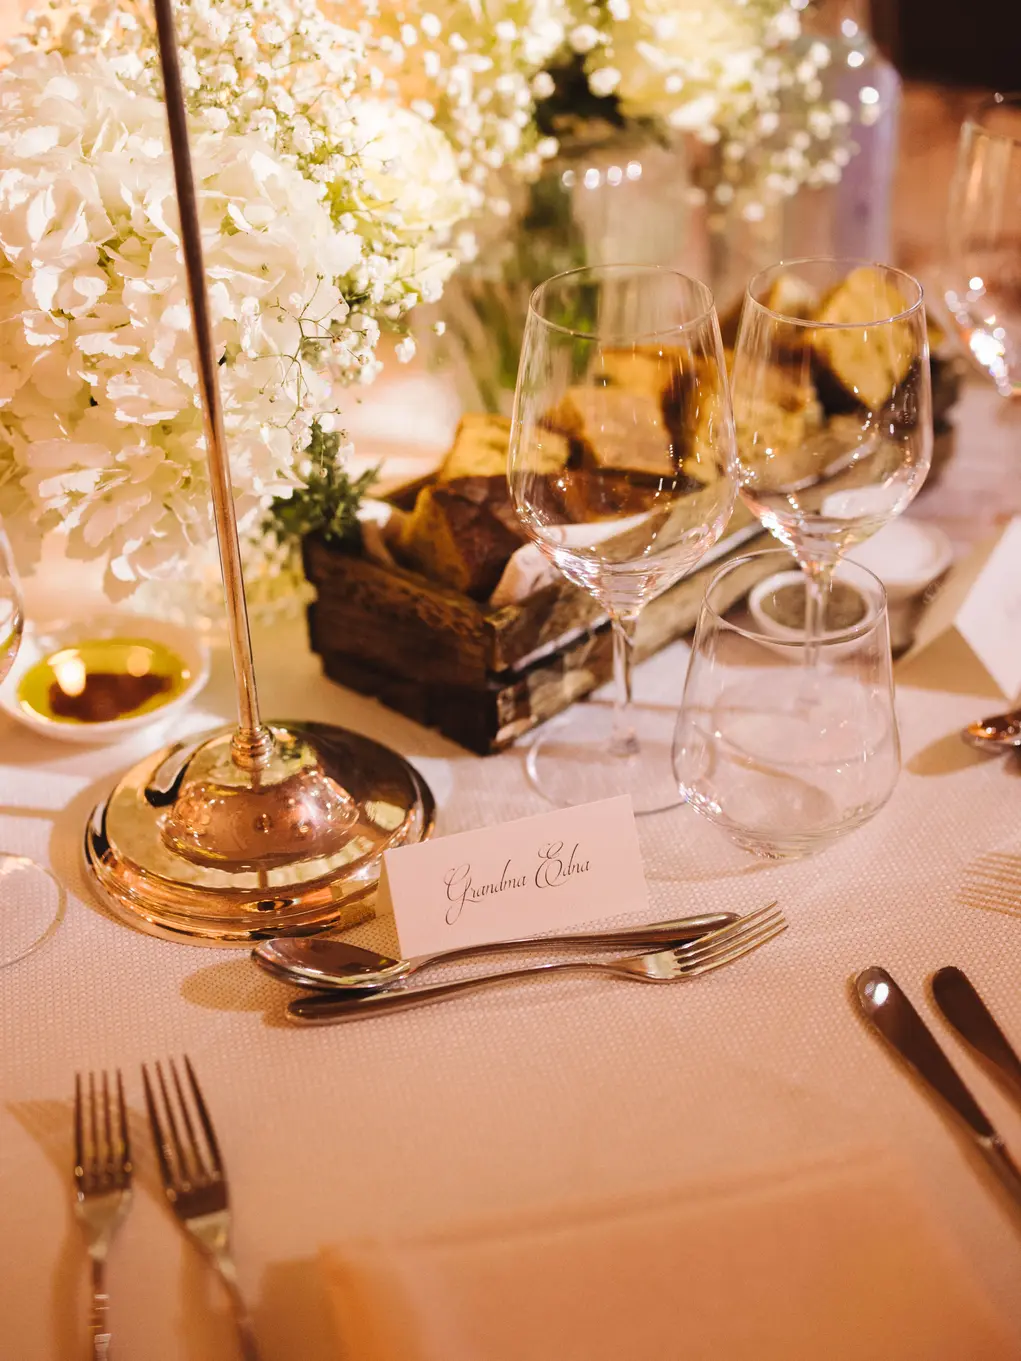 A table with glasses, cutlery and wedding flowers and a name tag